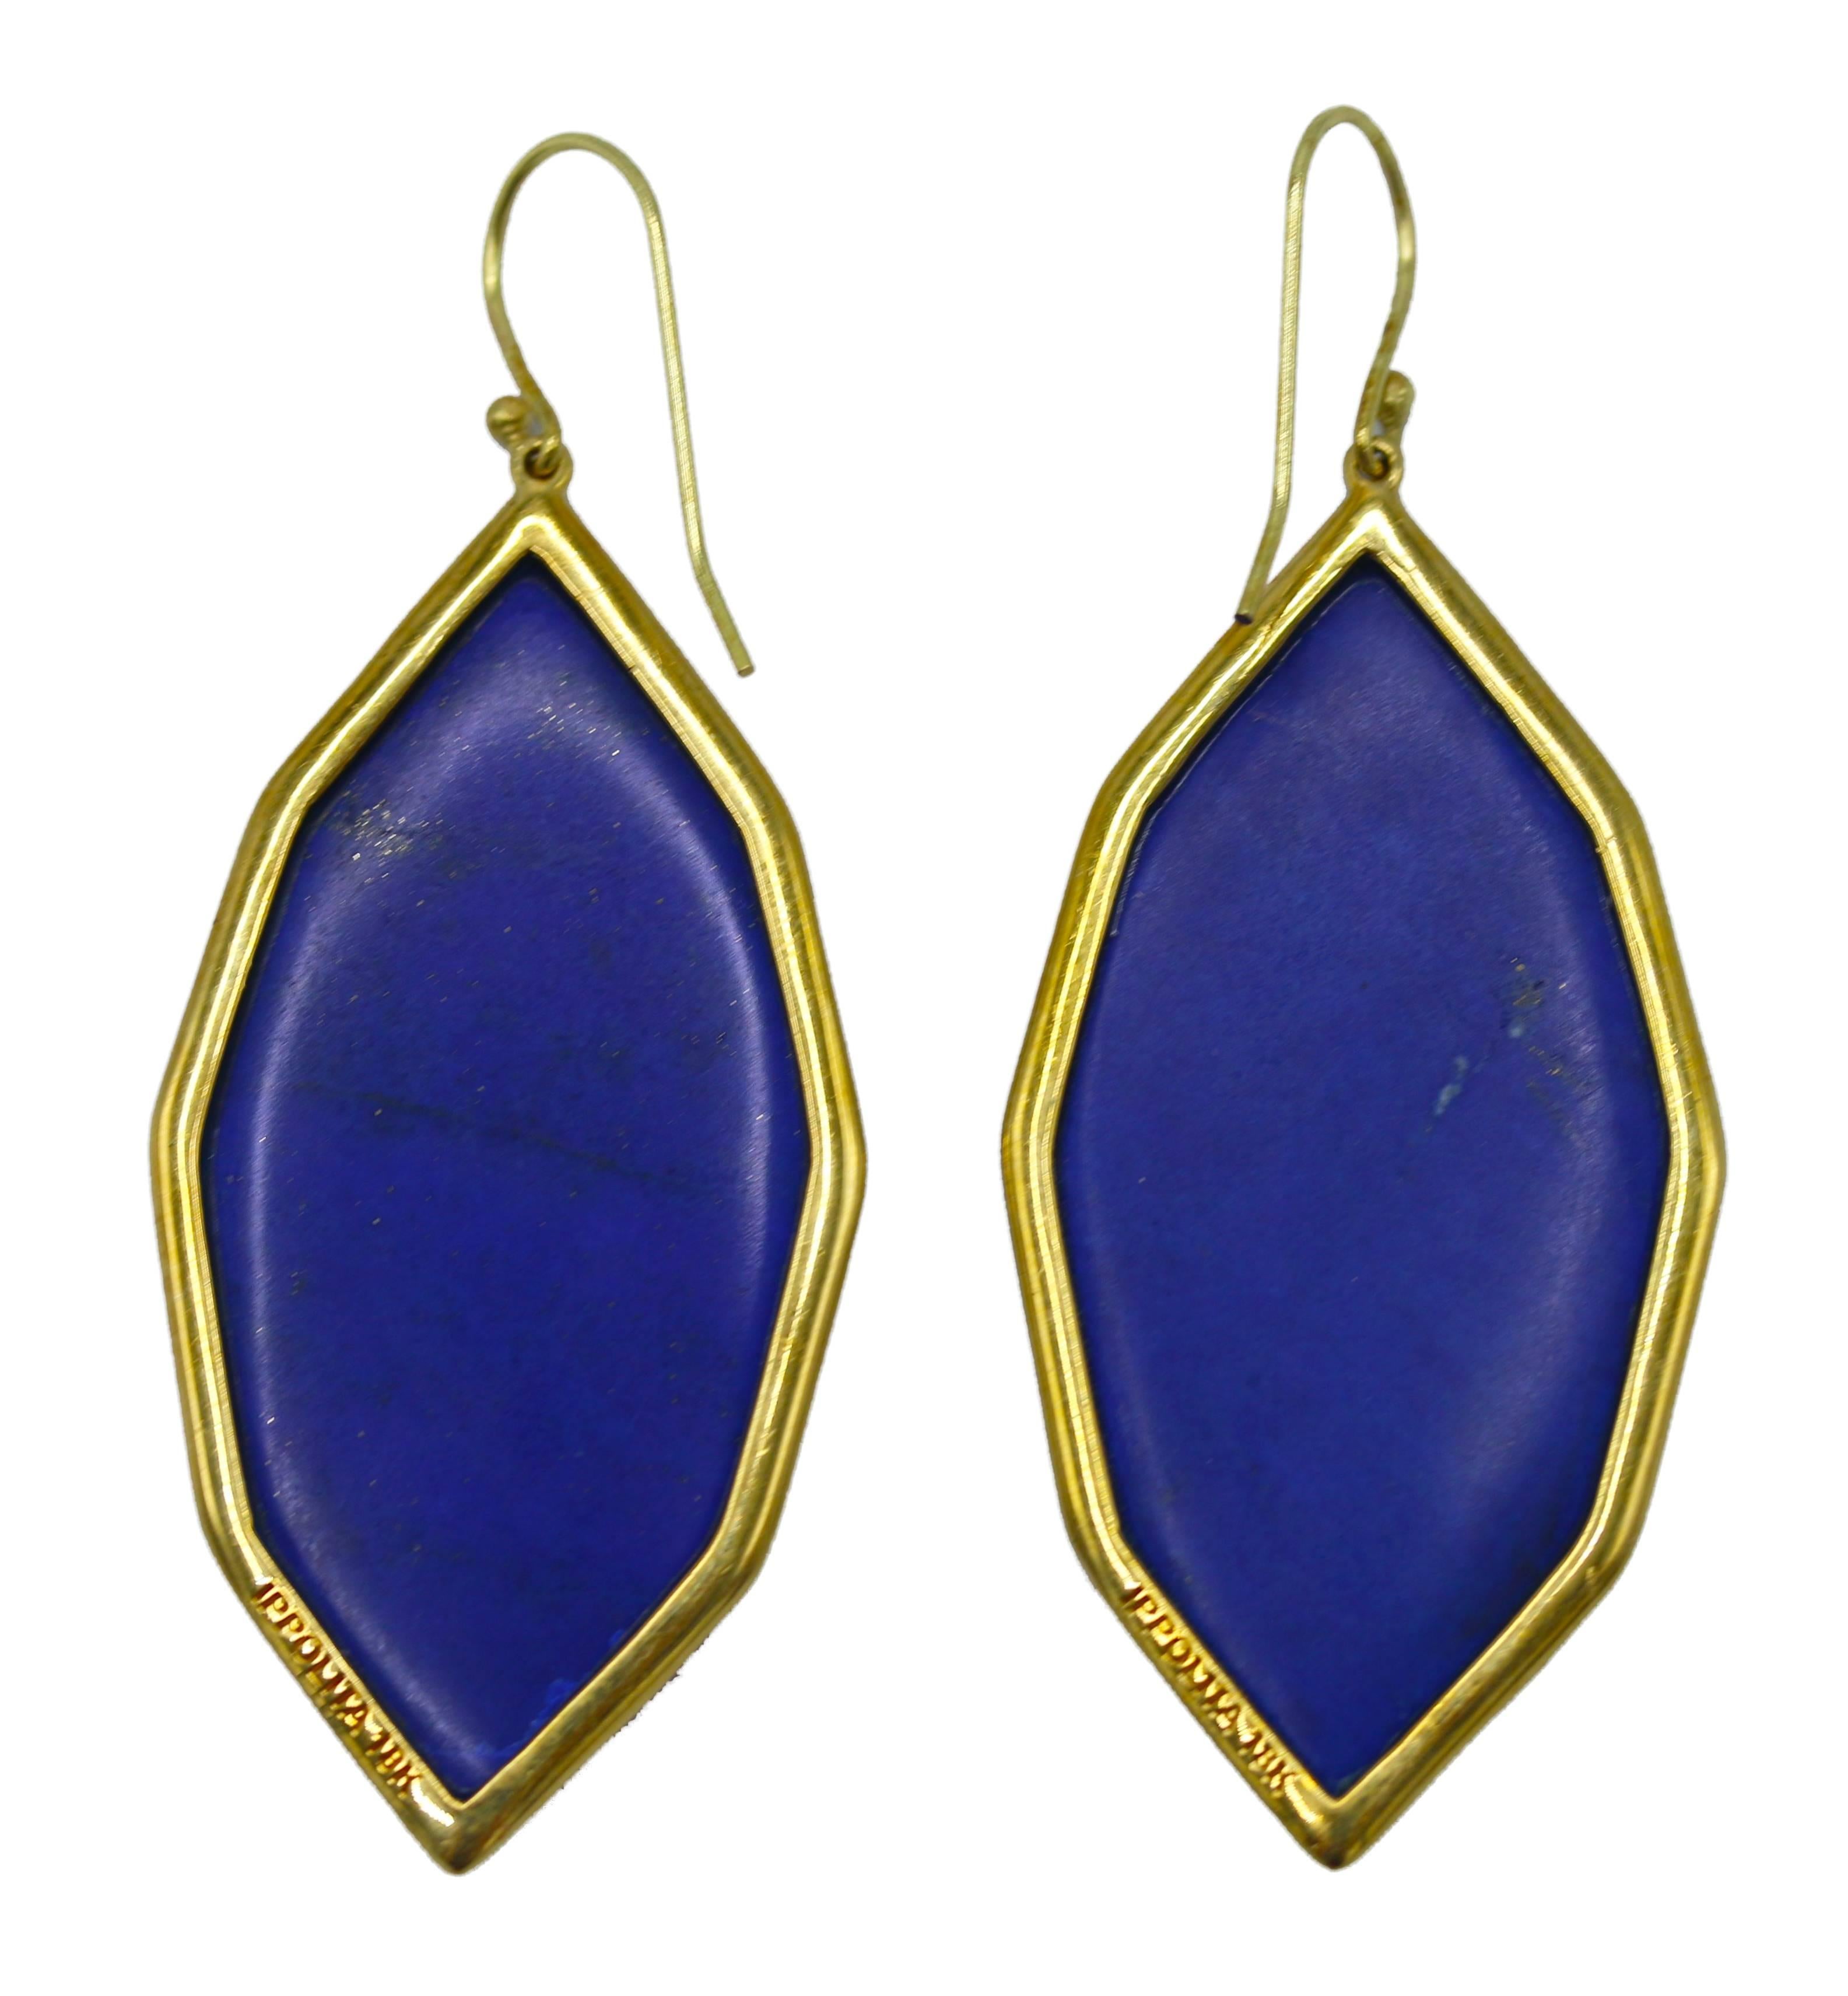 Pair of 18 karat yellow gold, lapis lazuli and diamond pendant earrings by Ippolita, the chic pendants set with geometric style carved lapis lazuli sections, all framed by round diamonds weighing 1.92 carats, measuring 2 1/2 by 1 inches, signed